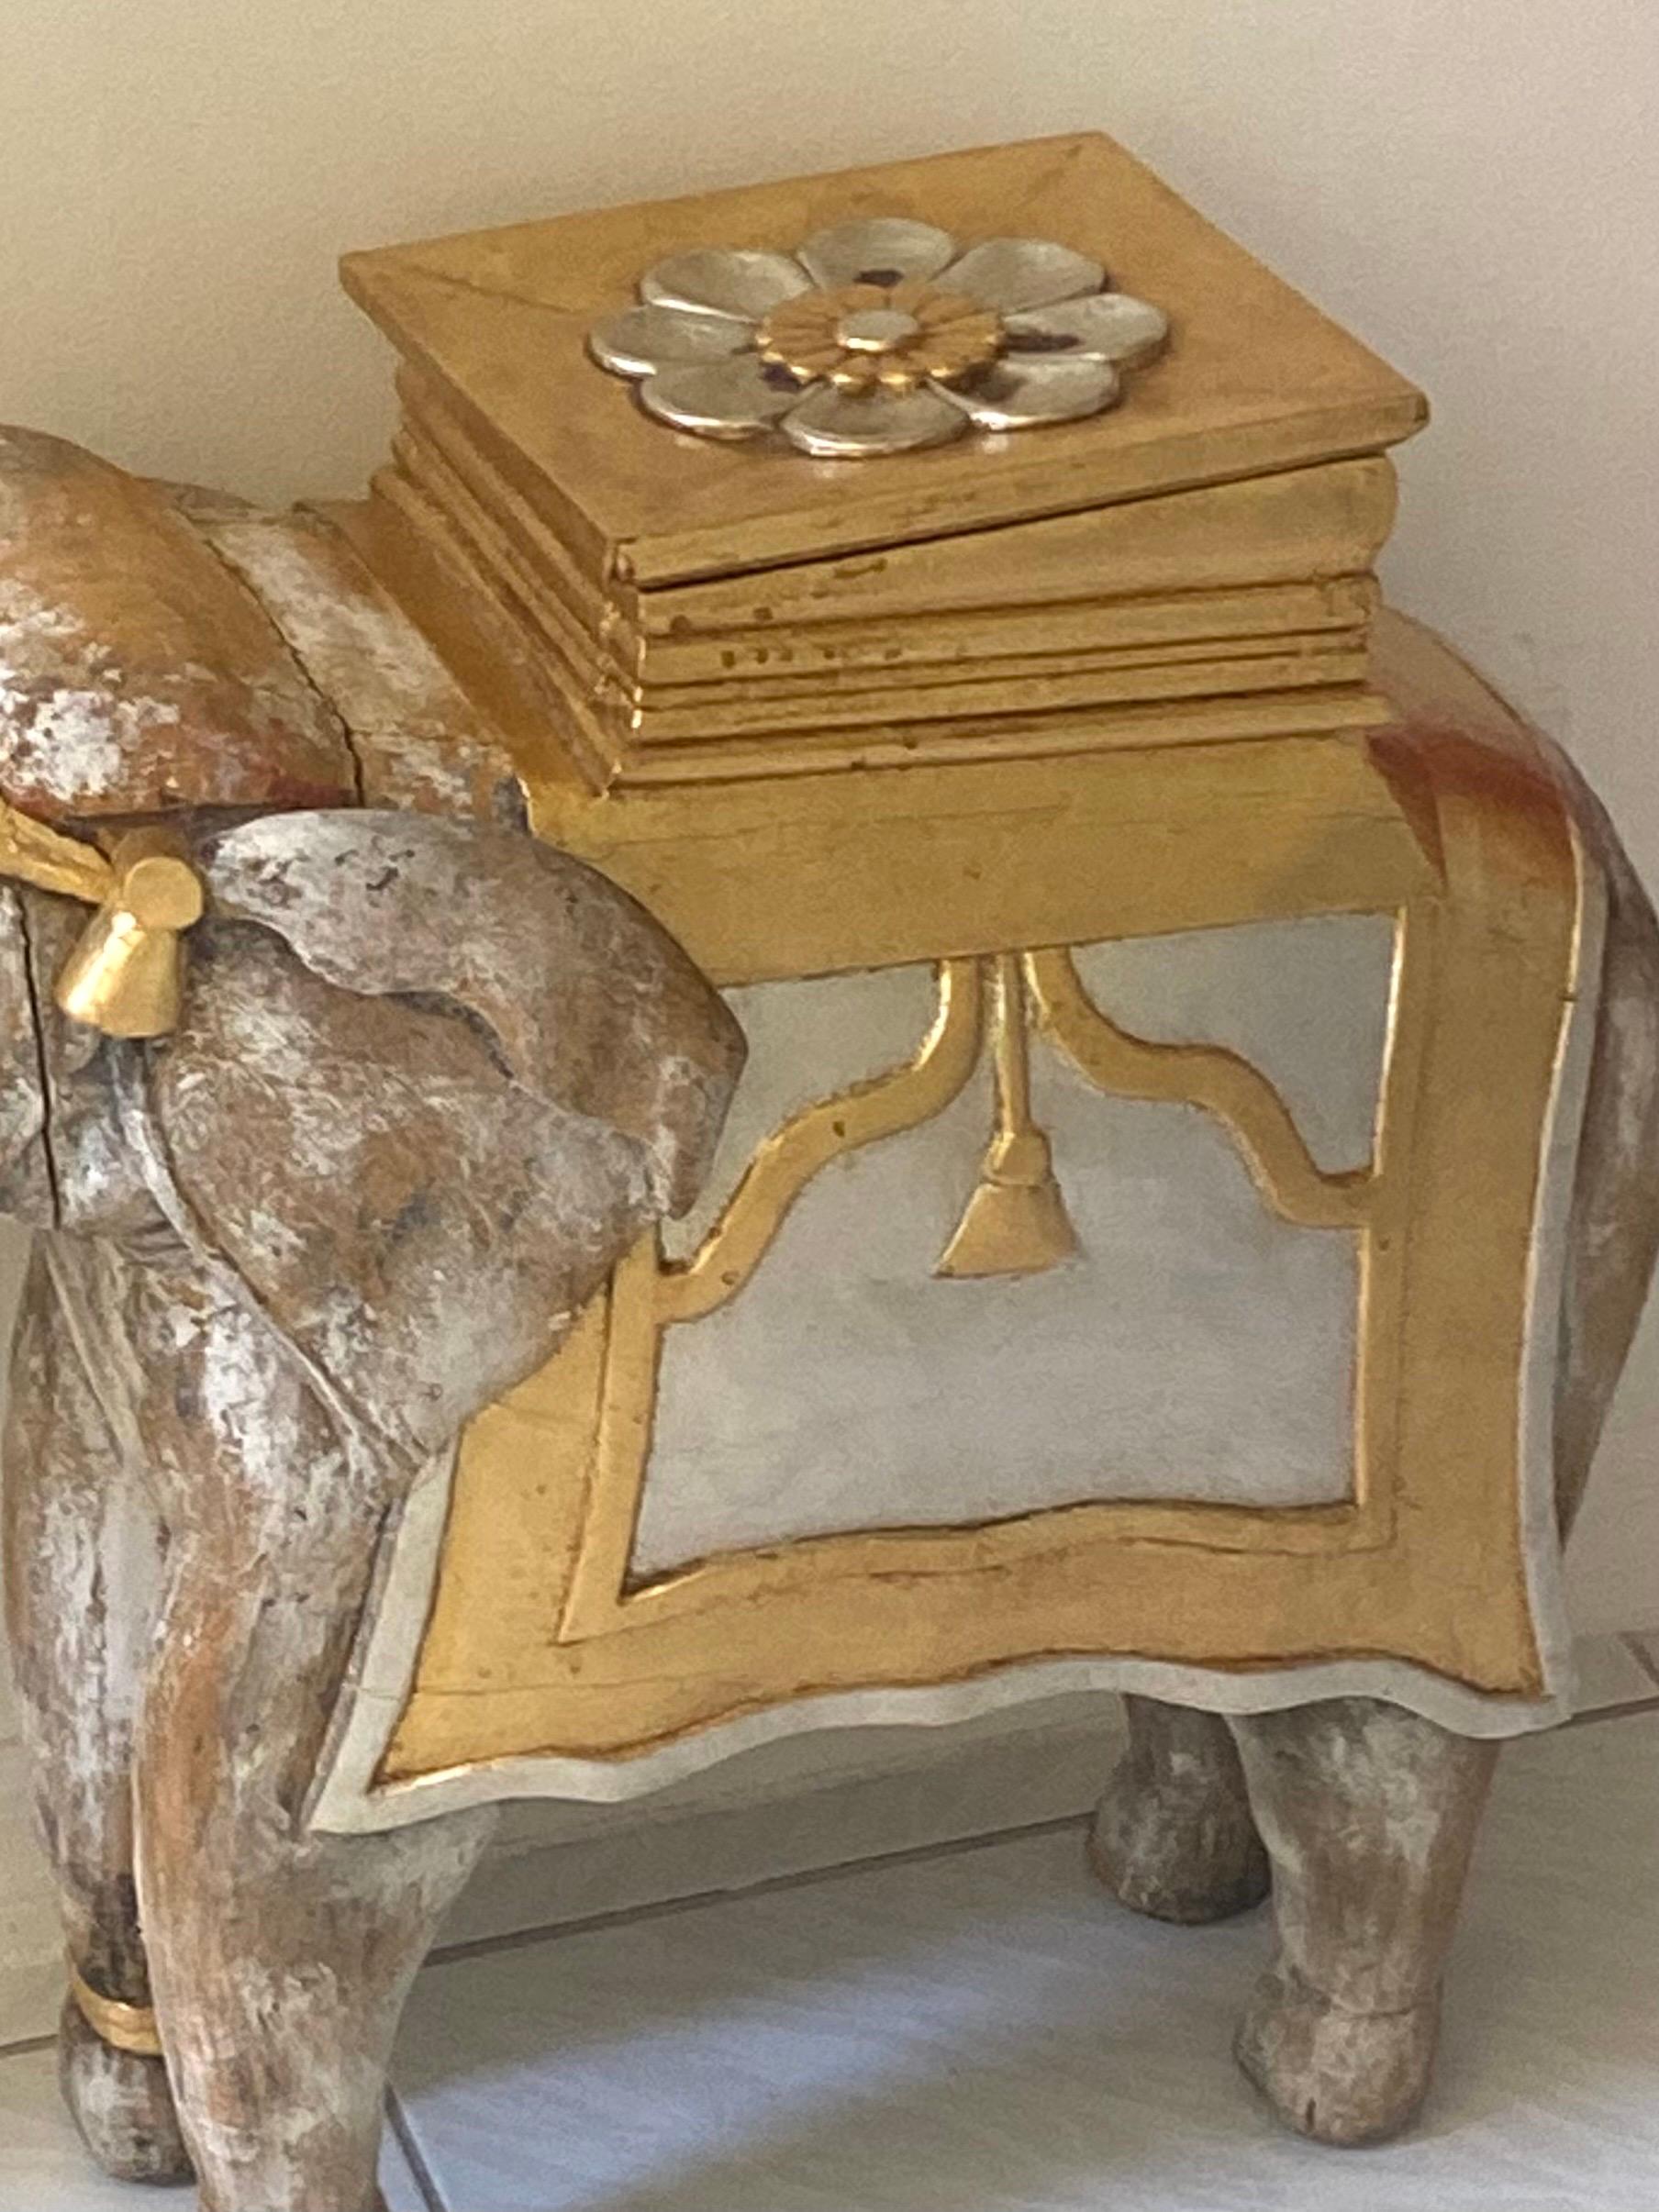 A very charming hand carved pickled wood elephant in full gold and silver leaf attire. The seat is a lid which can be removed to reveal a nice hidden storage area. This piece is versatile and can be used as a sculpture, side table, garden